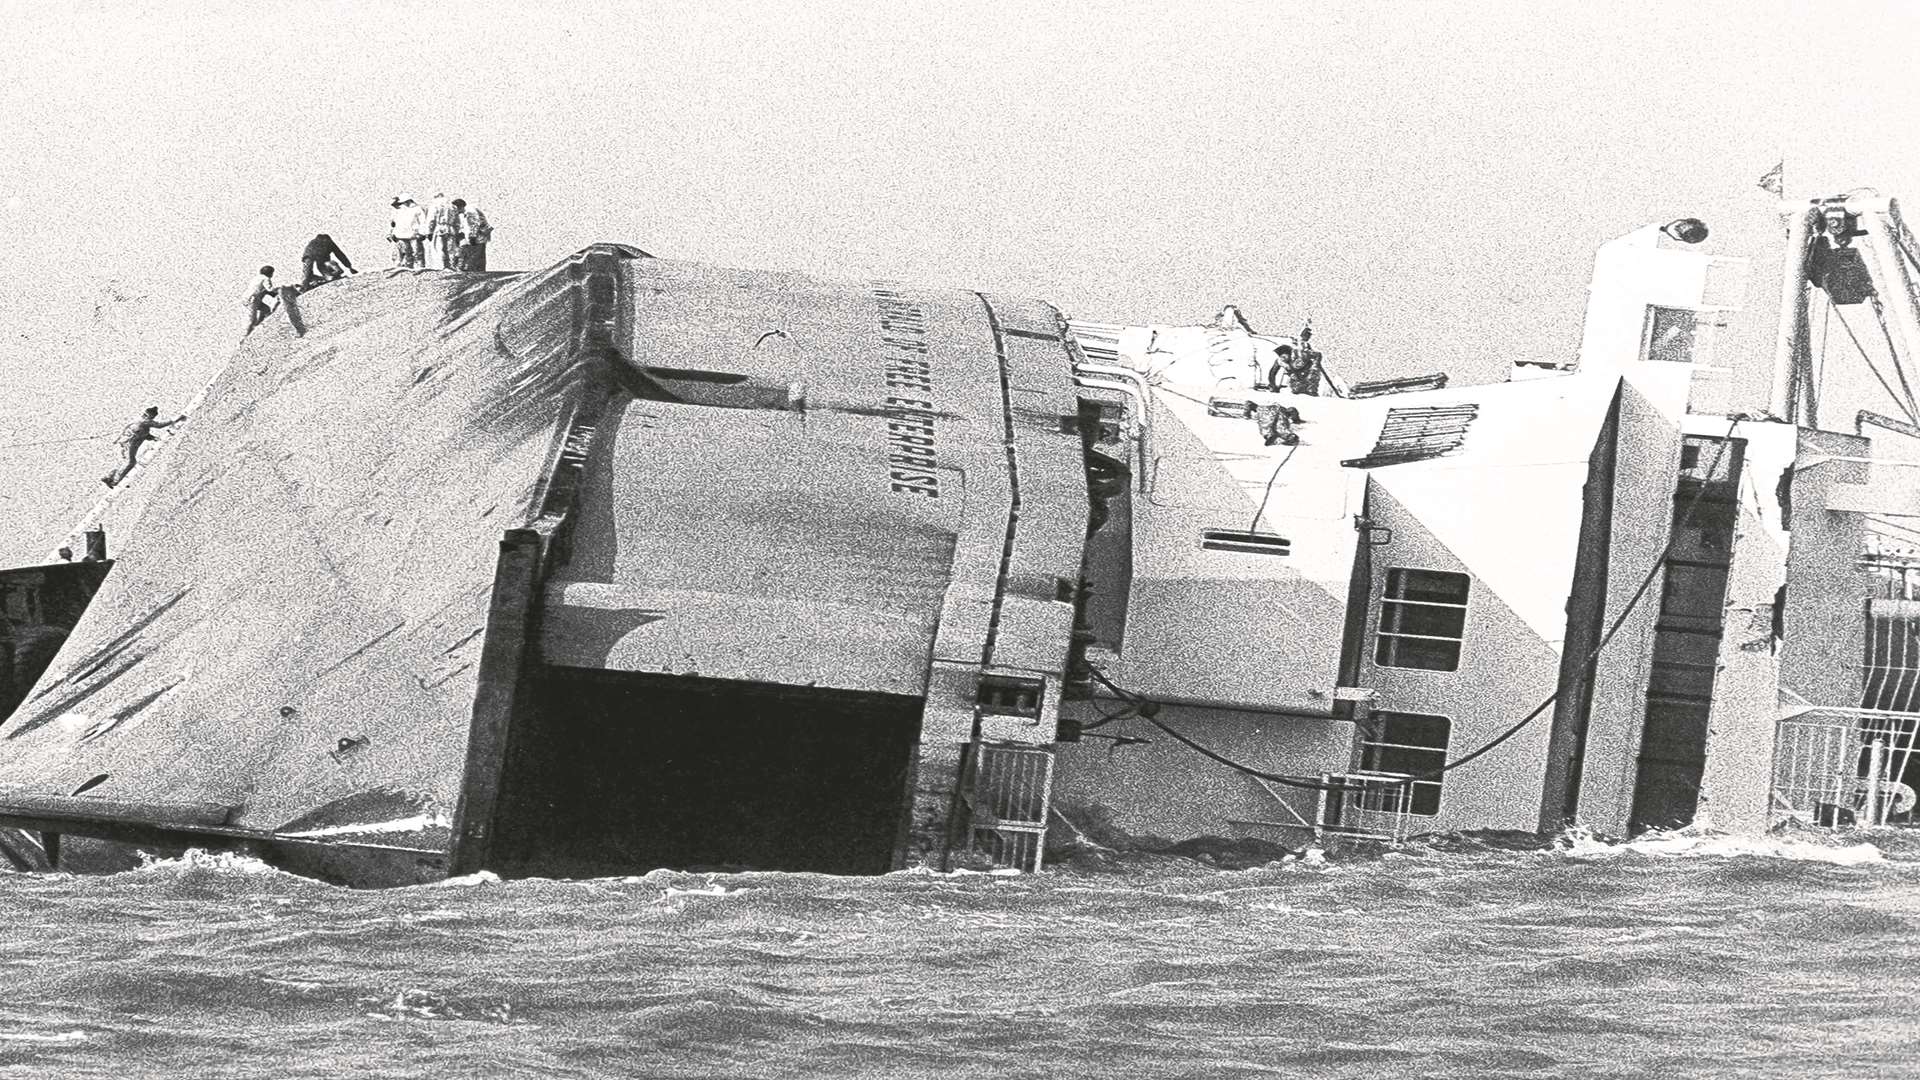 The Herald of Free Enterprise capsized just outside of the Zeebrugge harbour walls